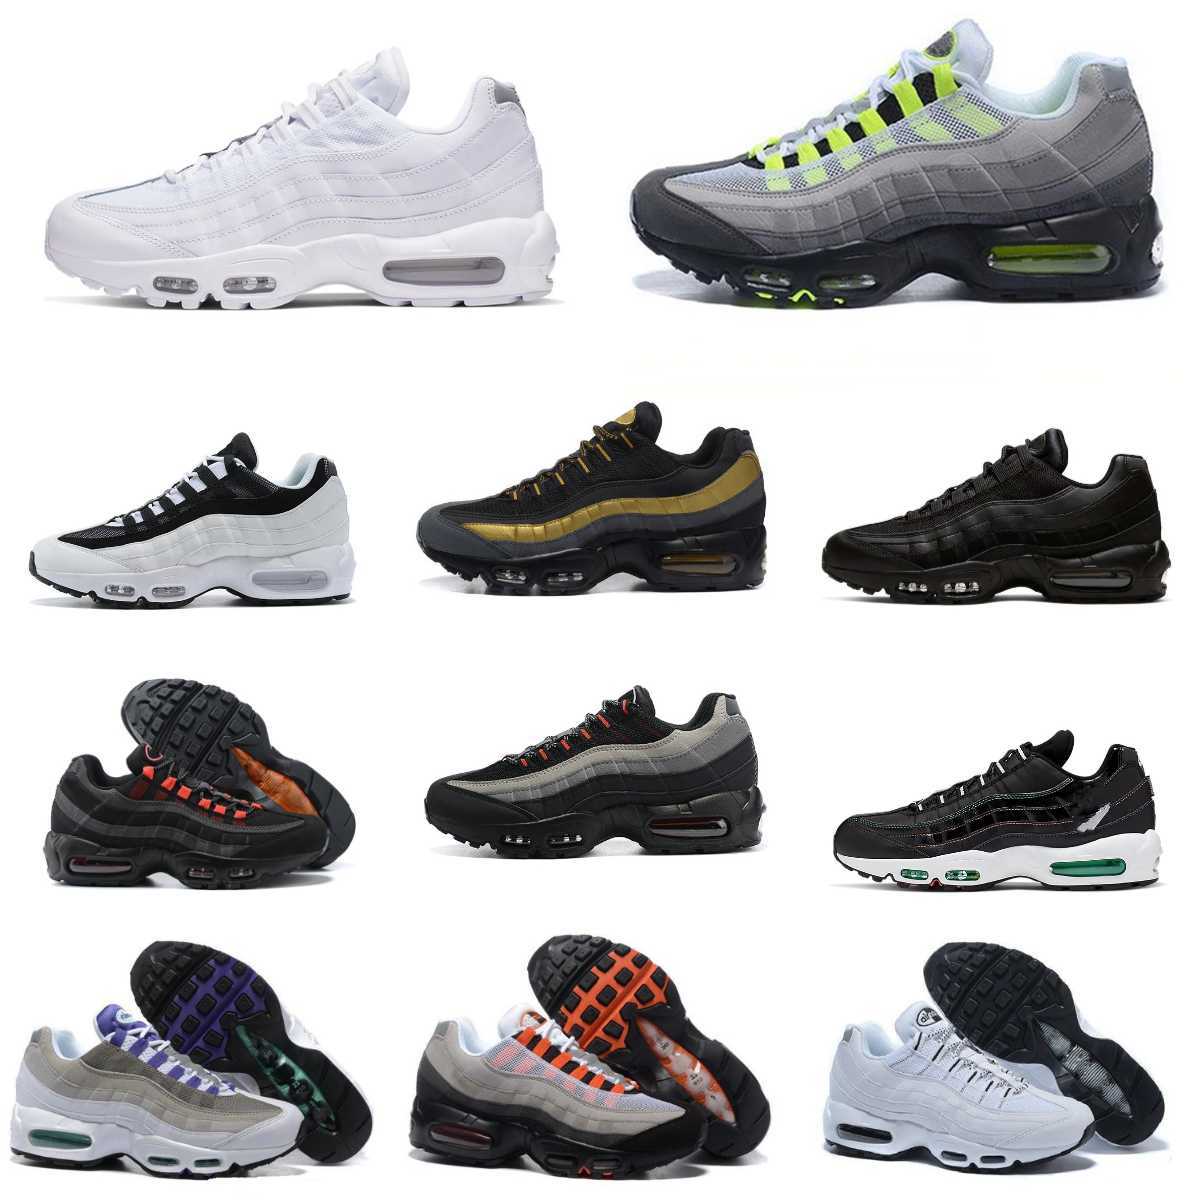 

2023 Top Quality Mens Running Shoes 95 Yin Yang OG Airs Solar Triple Black White Worldwide Seahawks Particle Grey Neon Laser Fuchsia Red Greedy 3.0 Sports Sneakers S16, Please contact us